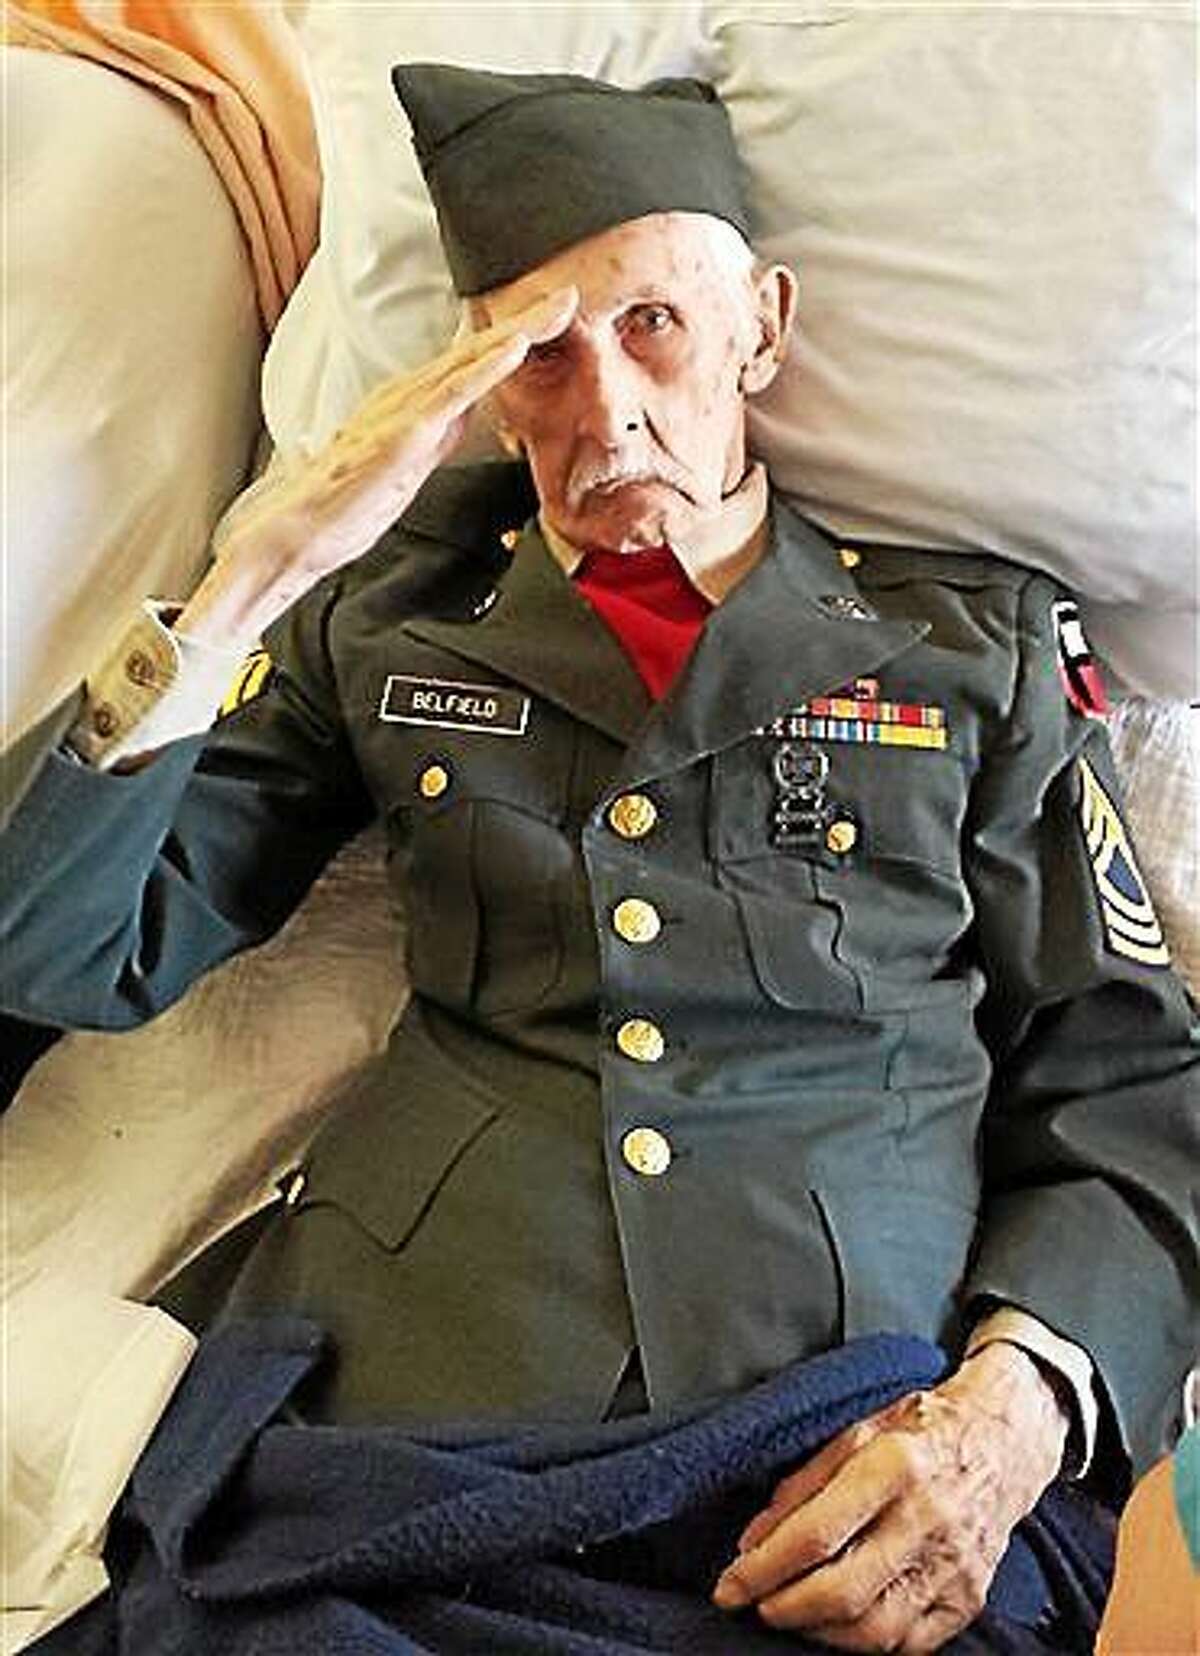 This Nov. 11, 2014 photo provided courtesy of Nancy McKiernan of Baptist Health Nursing and Rehabilitation Center in Glenville, N.Y., shows 98-year-old World War II veteran Justus Belfield saluting on Veterans Day. The Daily Gazette of Schenectady reports Belfield had worn his Army uniform every Veterans Day since he and his wife moved into the nursing home outside Albany several years ago. On Tuesday, the former master sergeant wasn't able to get out of bed to participate in the facility's Veterans Day festivities, so he had the staff dress him in his uniform. Belfield passed away the next day. (AP Photo/Courtesy of Nancy McKiernan/Baptist Health Nursing and Rehabilitation Center)